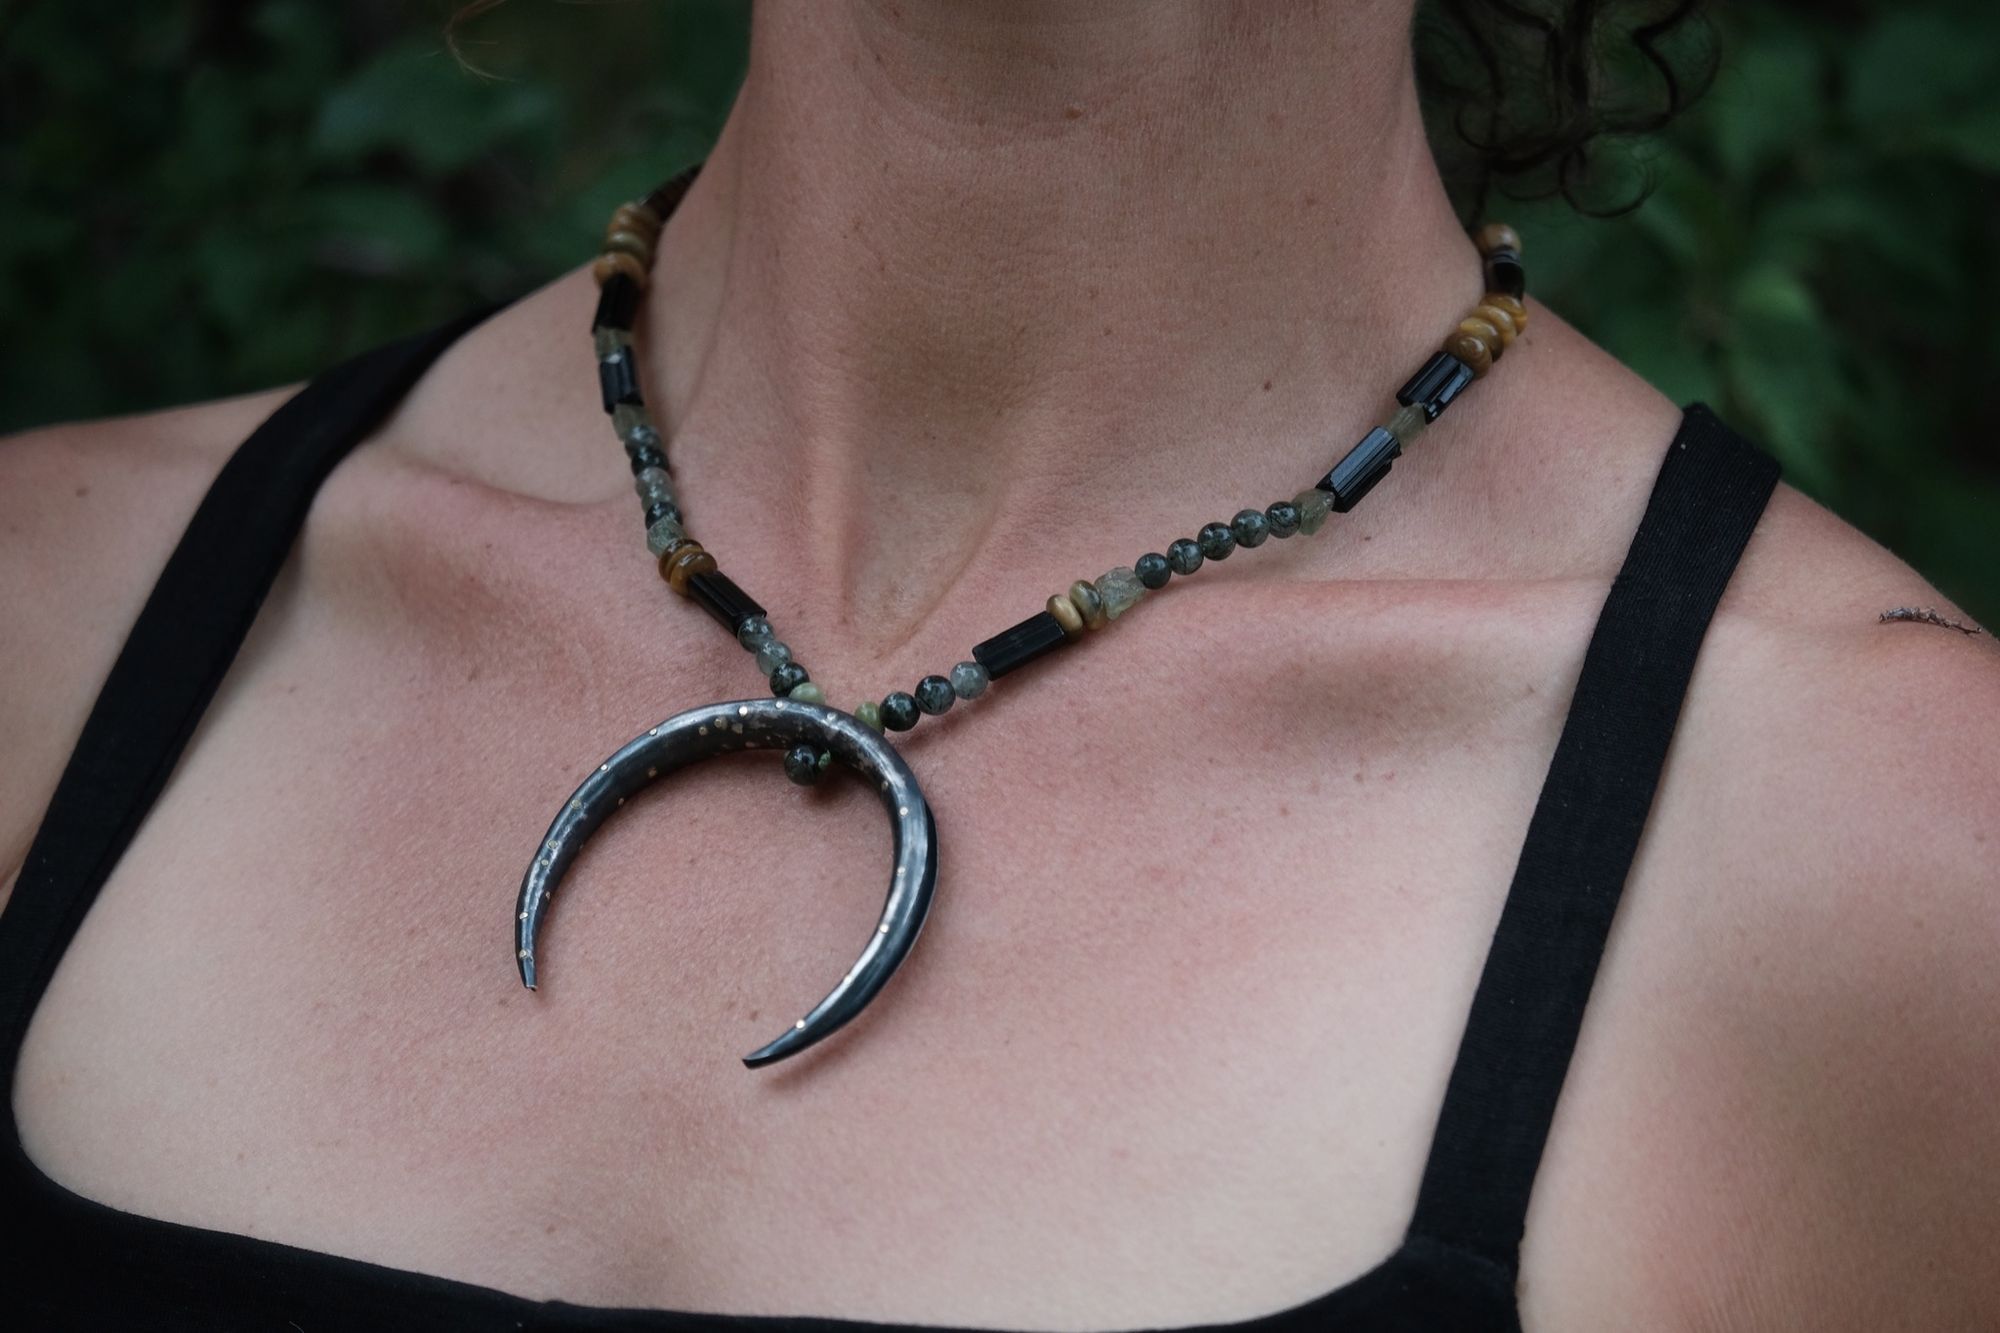 A necklace of brown, green, tan and black semi precious stone beads with a silver and gold moon at the center rests on a woman in a black dress